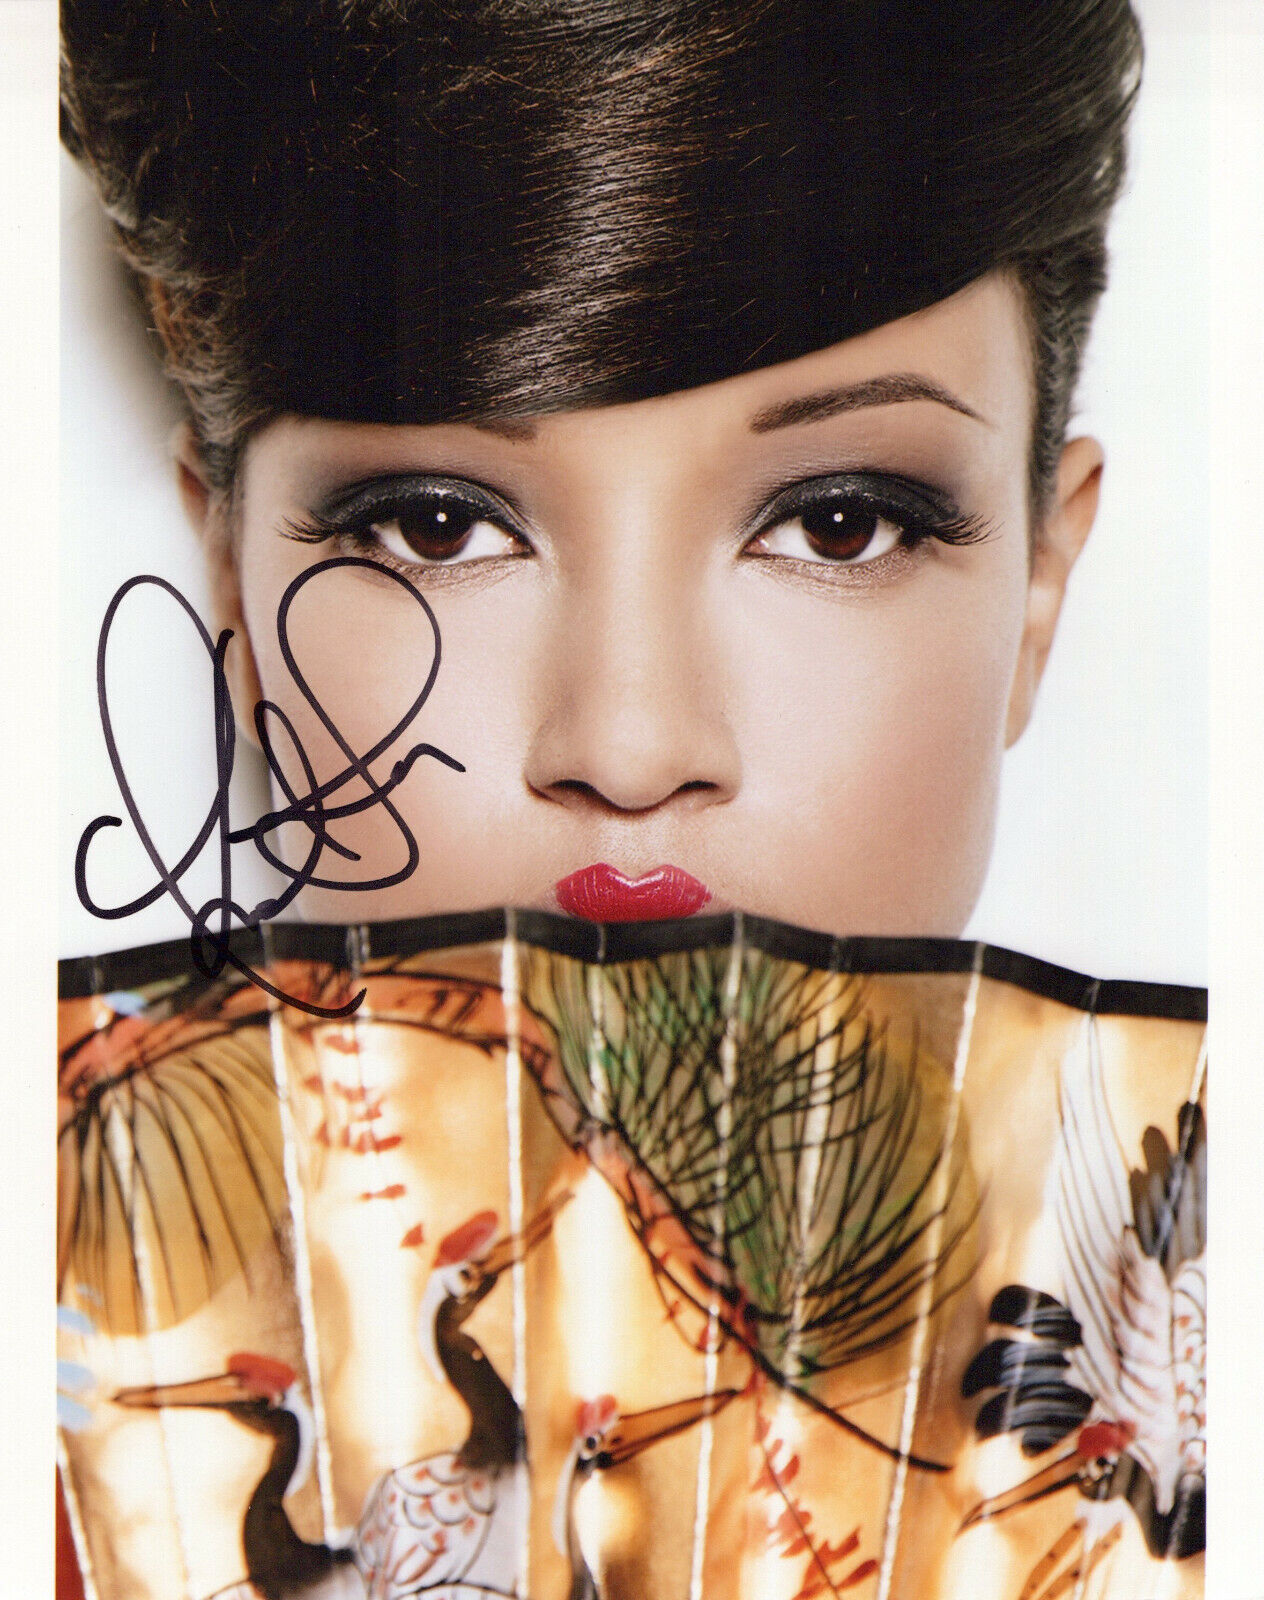 Karreuche Tran glamour shot autographed Photo Poster painting signed 8x10 #2